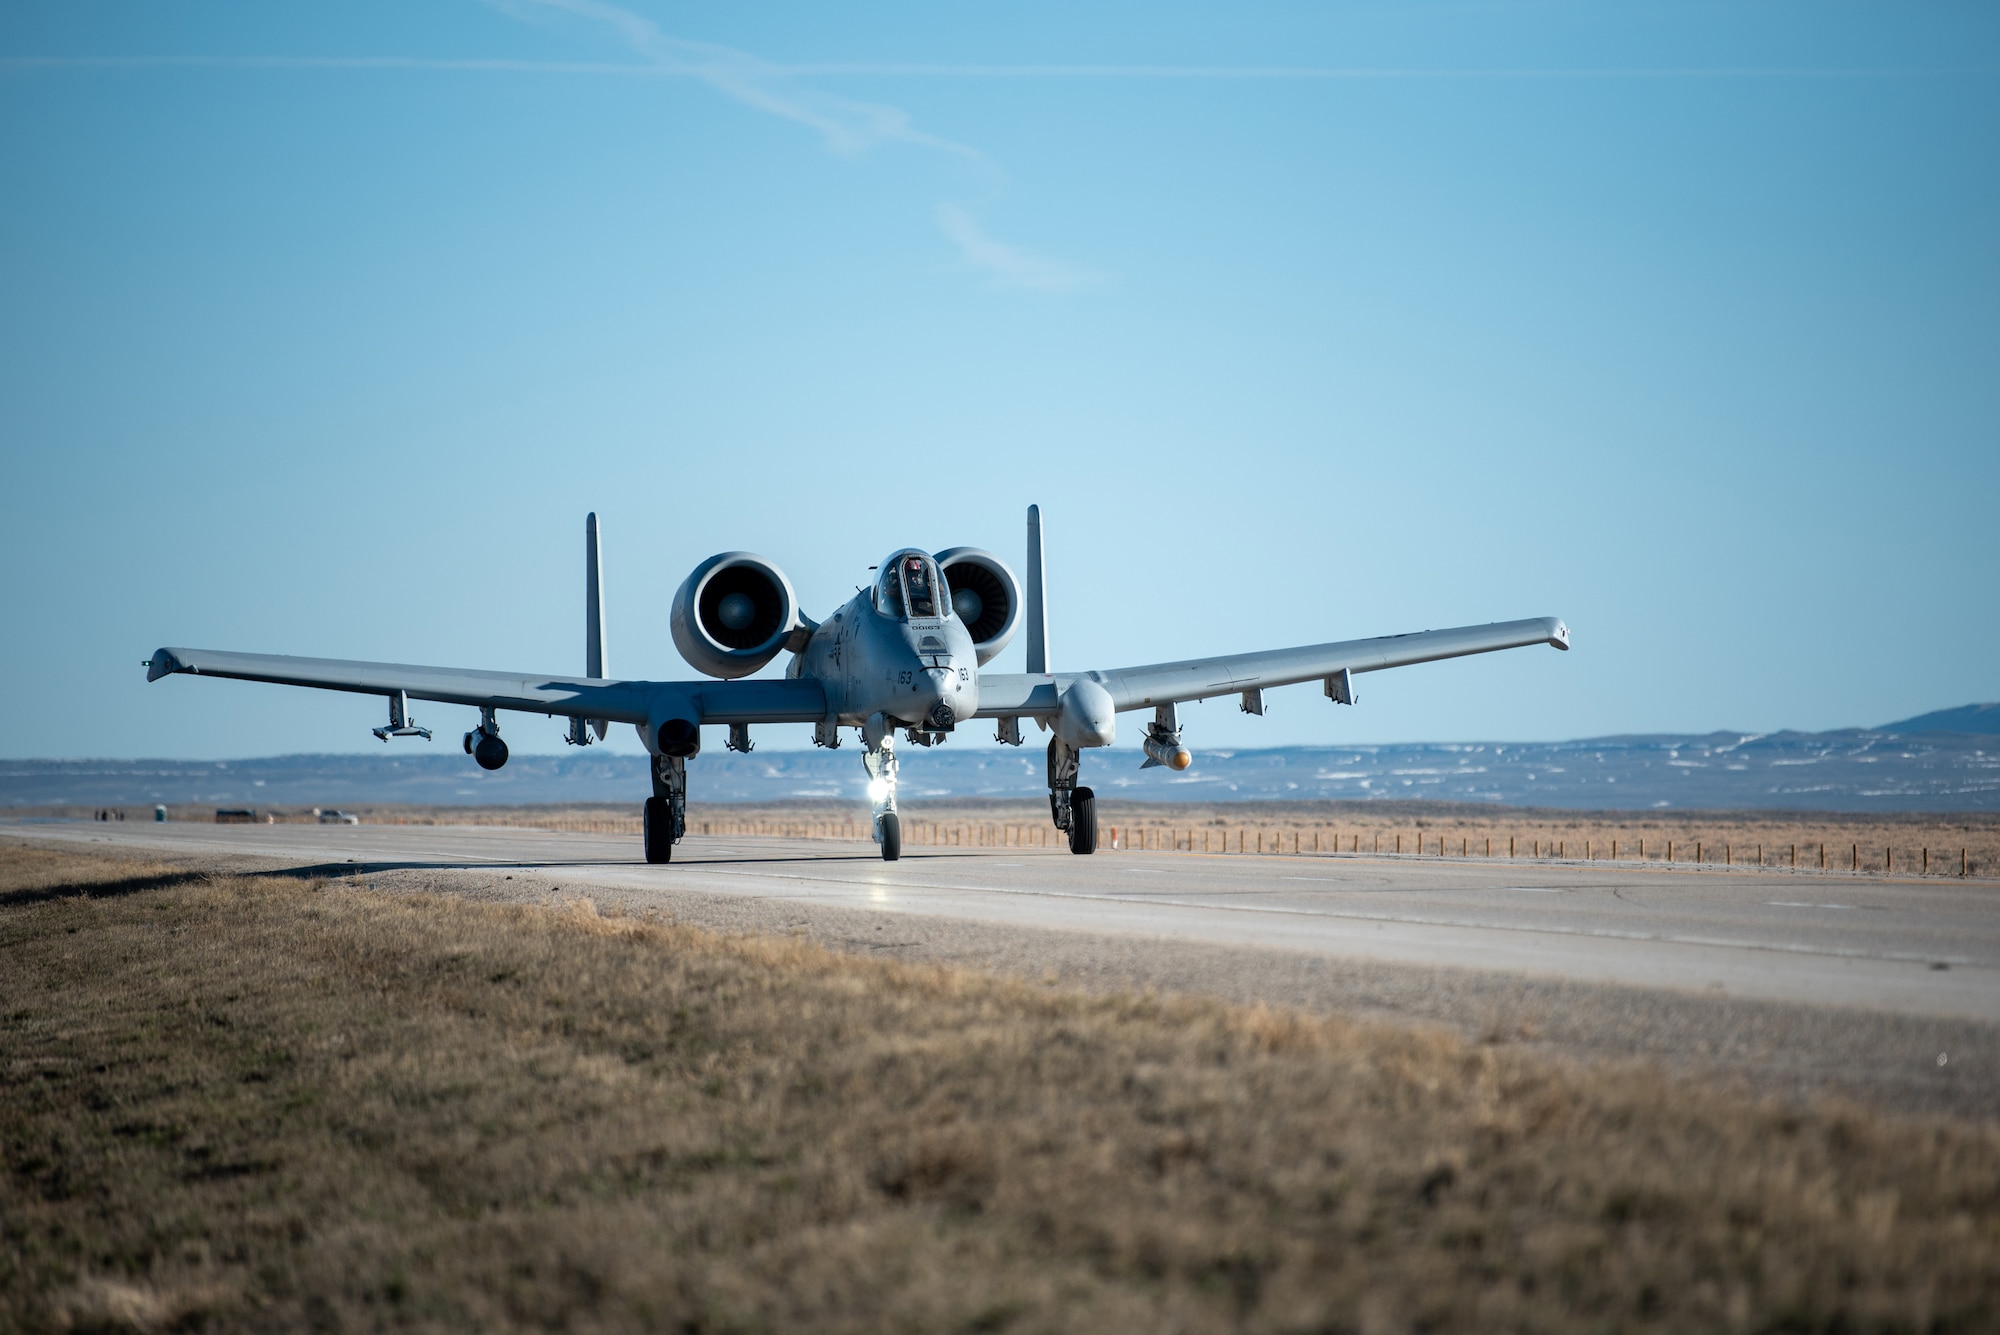 An A-10 Thunderbolt II lands on Highway 287 in Wyoming during Exercise Agile Chariot on April 30, 2023, honing capabilities linked to Agile Combat Employment. Instead of relying on large, fixed bases and infrastructure, ACE employs smaller, more dispersed locations and teams to rapidly move aircraft, pilots and other personnel as needed. Under ACE, millions of miles of public roads can serve as functional runways with Forward Arming and Refueling Points when necessary. (U.S. Air National Guard photo by Master Sgt. Phil Speck)